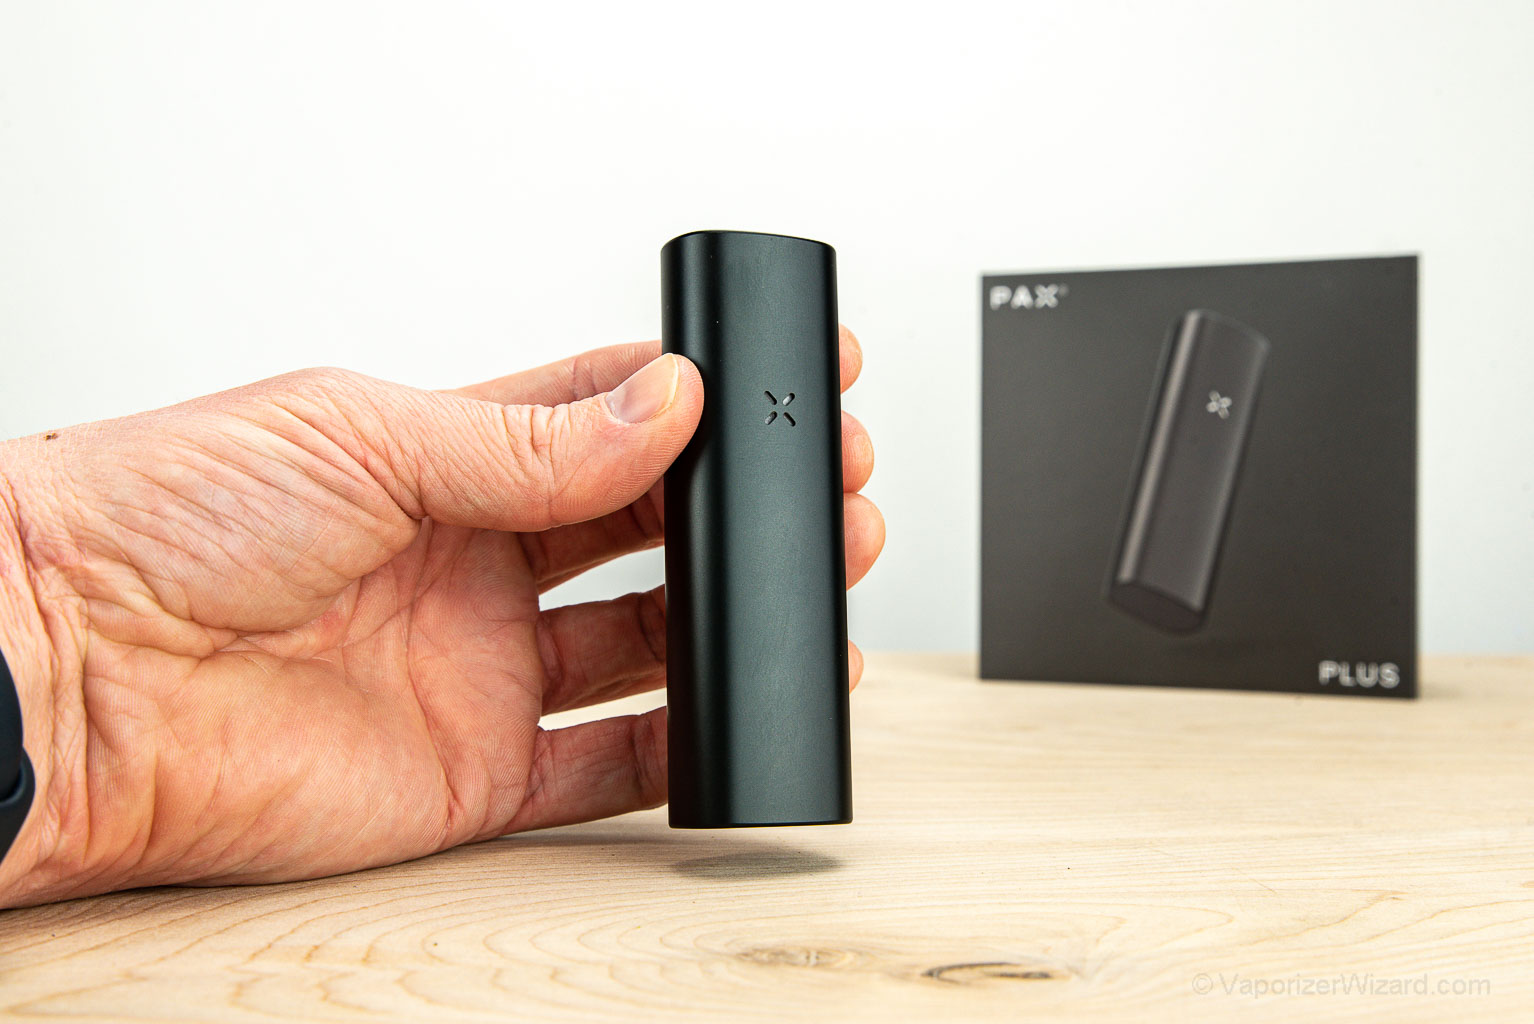 Pax Plus & Pax mini: differences from previous models - Cannahouse